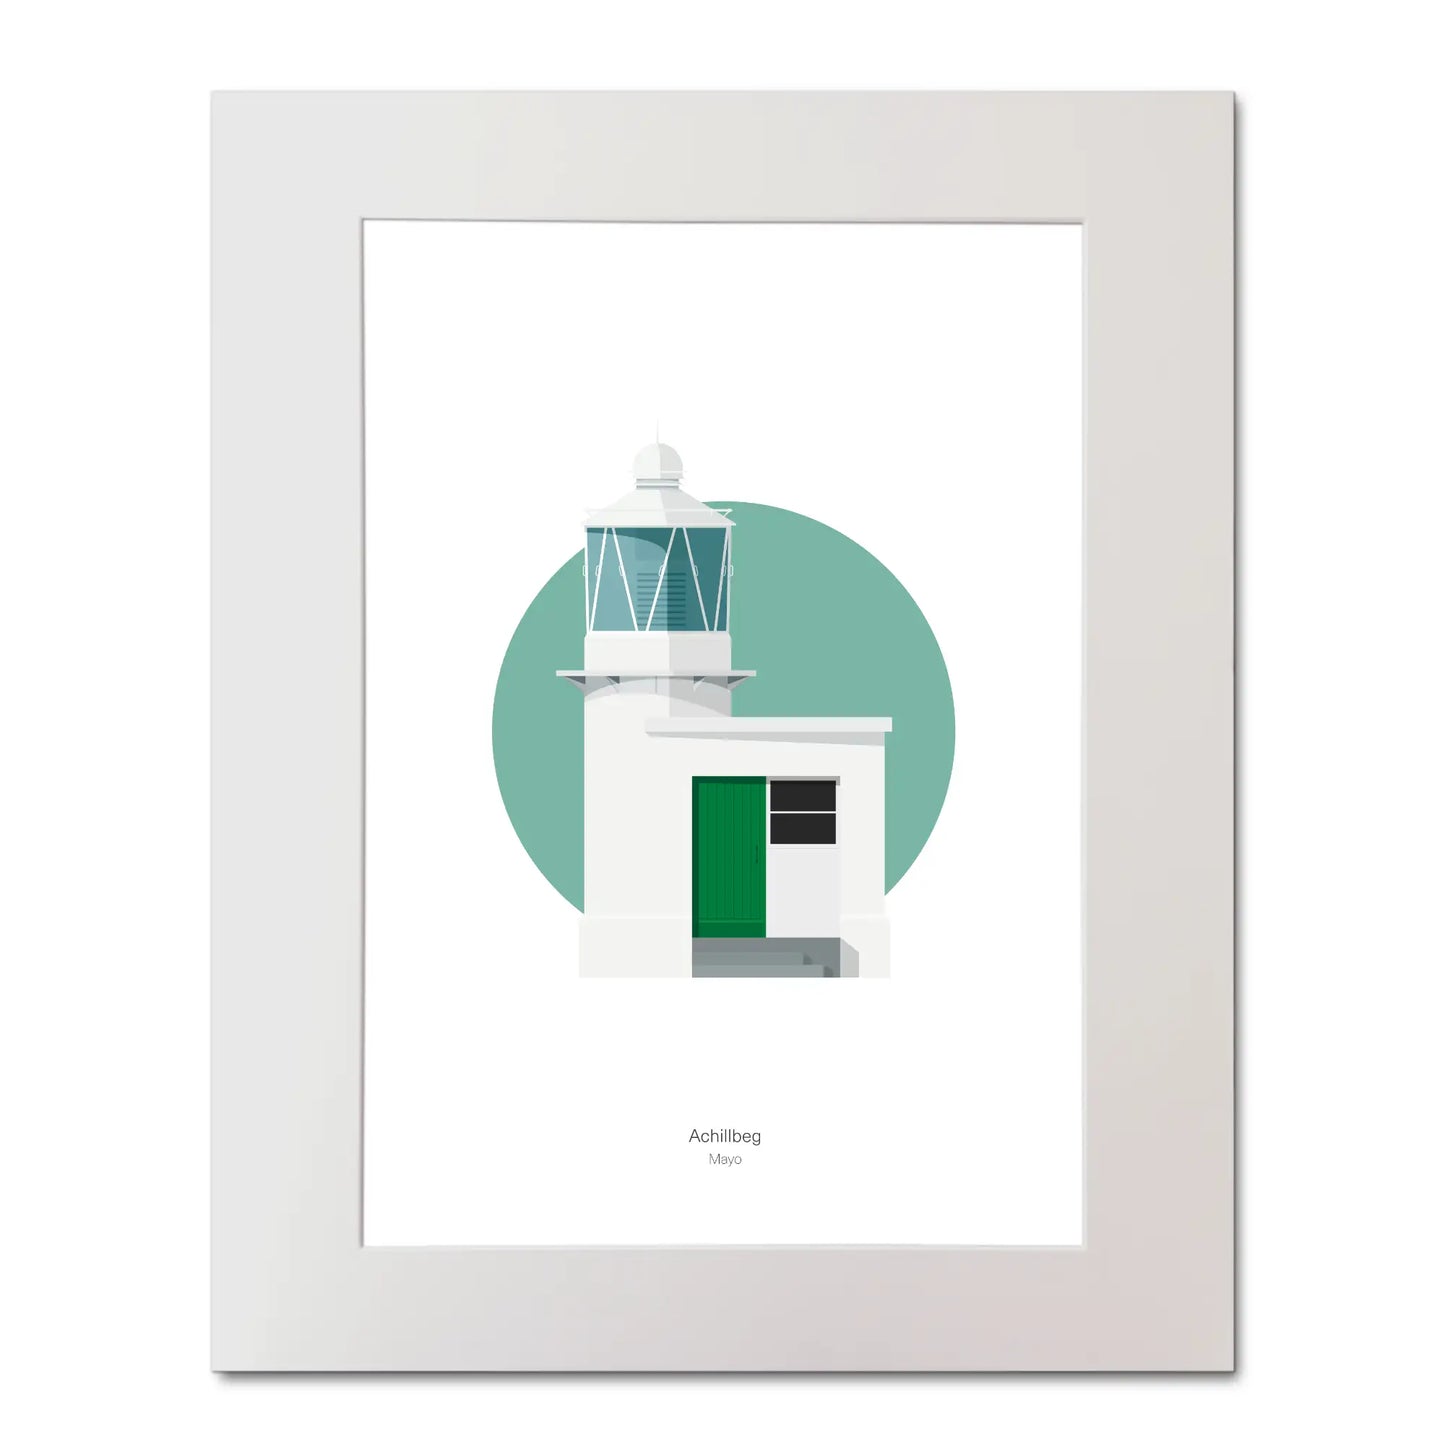 Contemporary illustration of Achillbeg lighthouse on a white background inside light blue square, mounted and measuring 40x50cm.